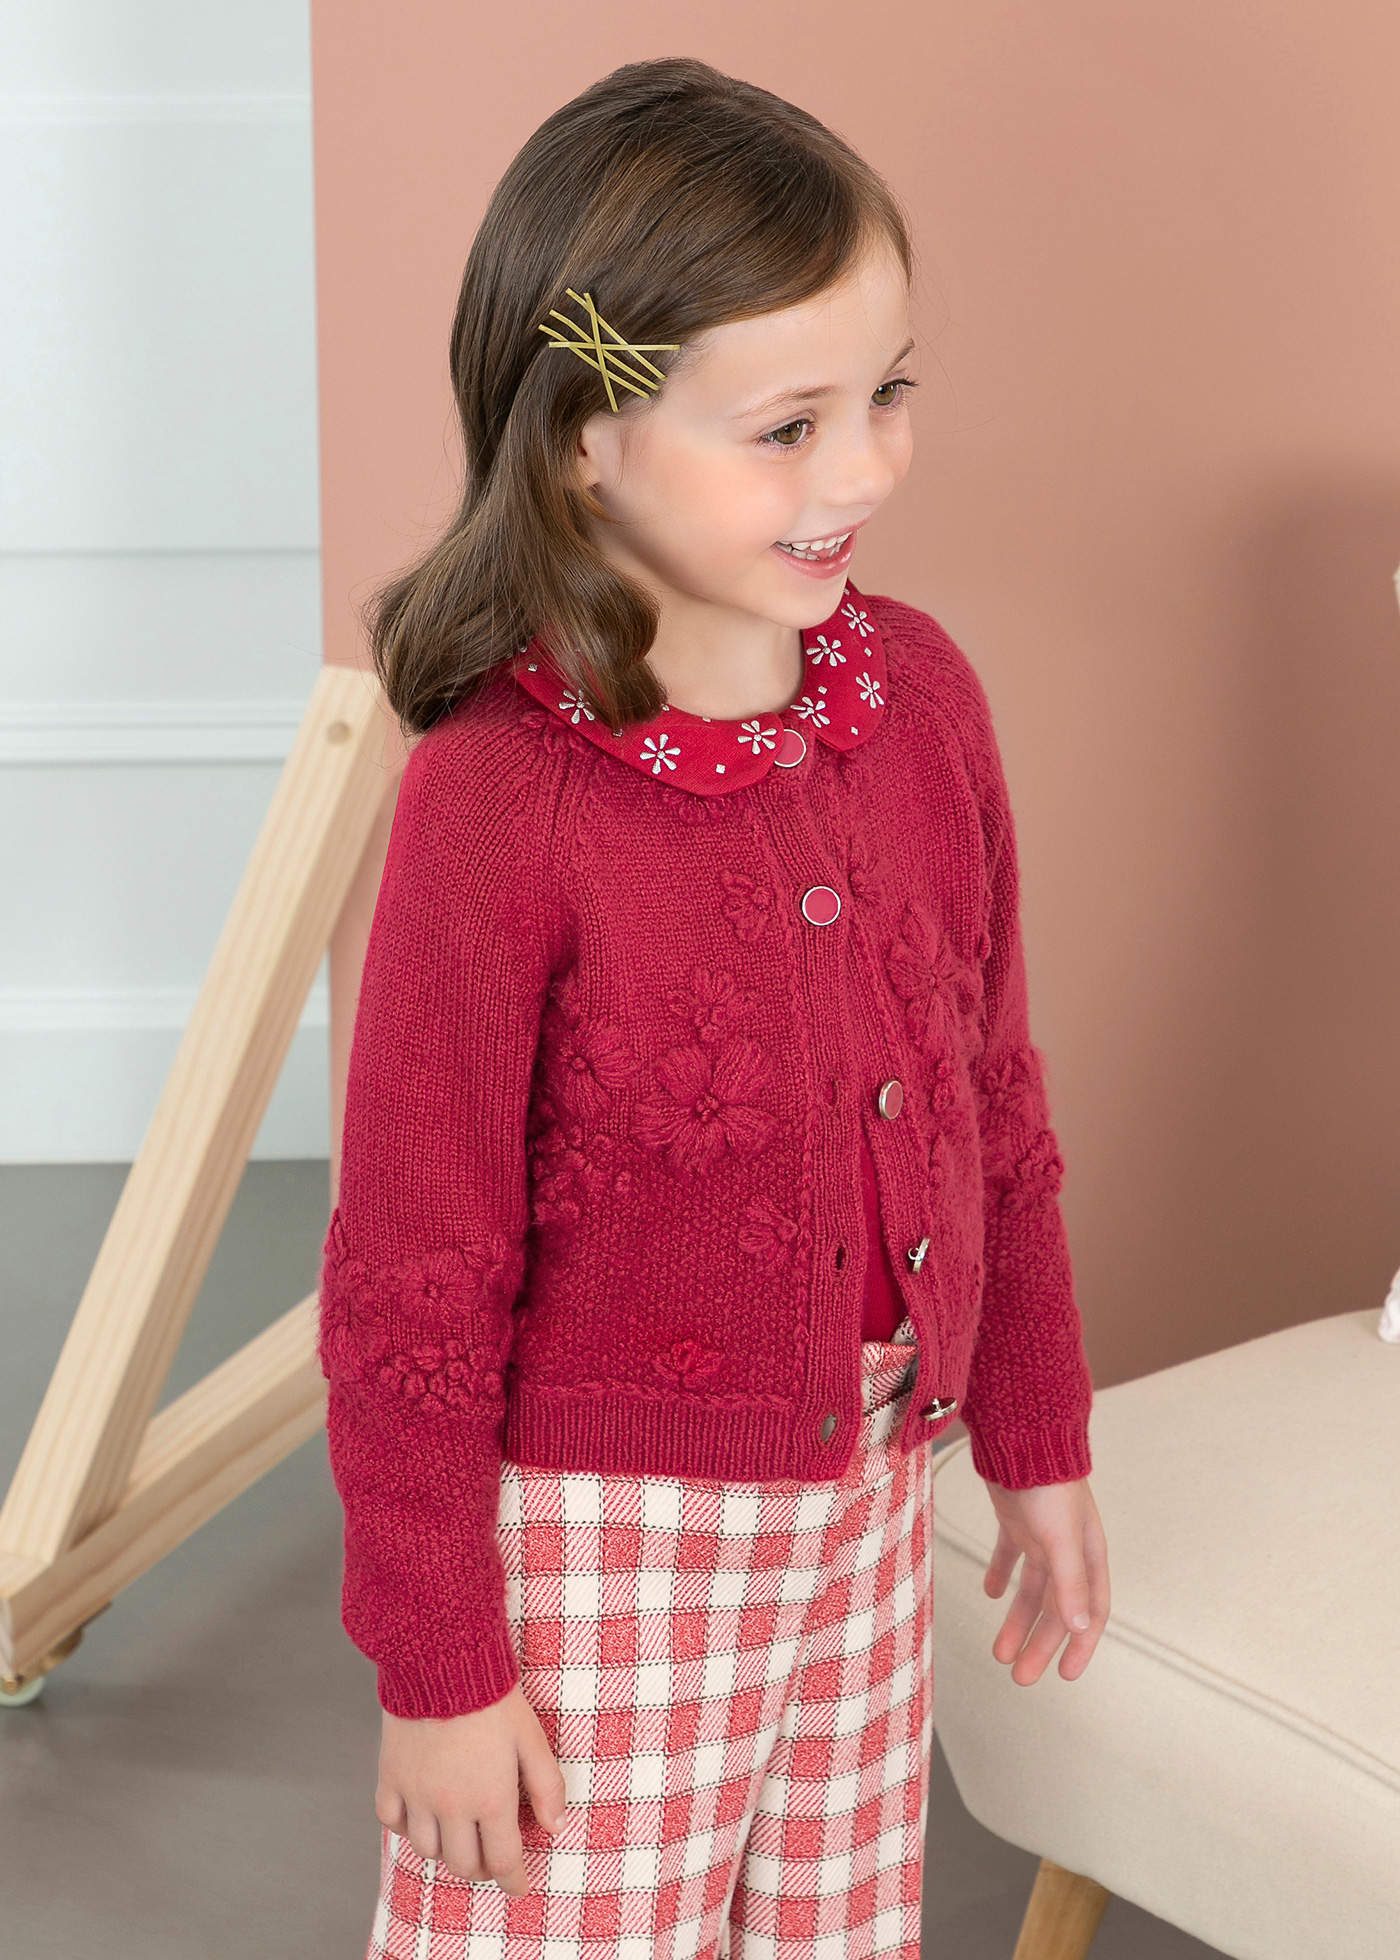 Knit cardigan embroidered flowers girl | Abel & Lula